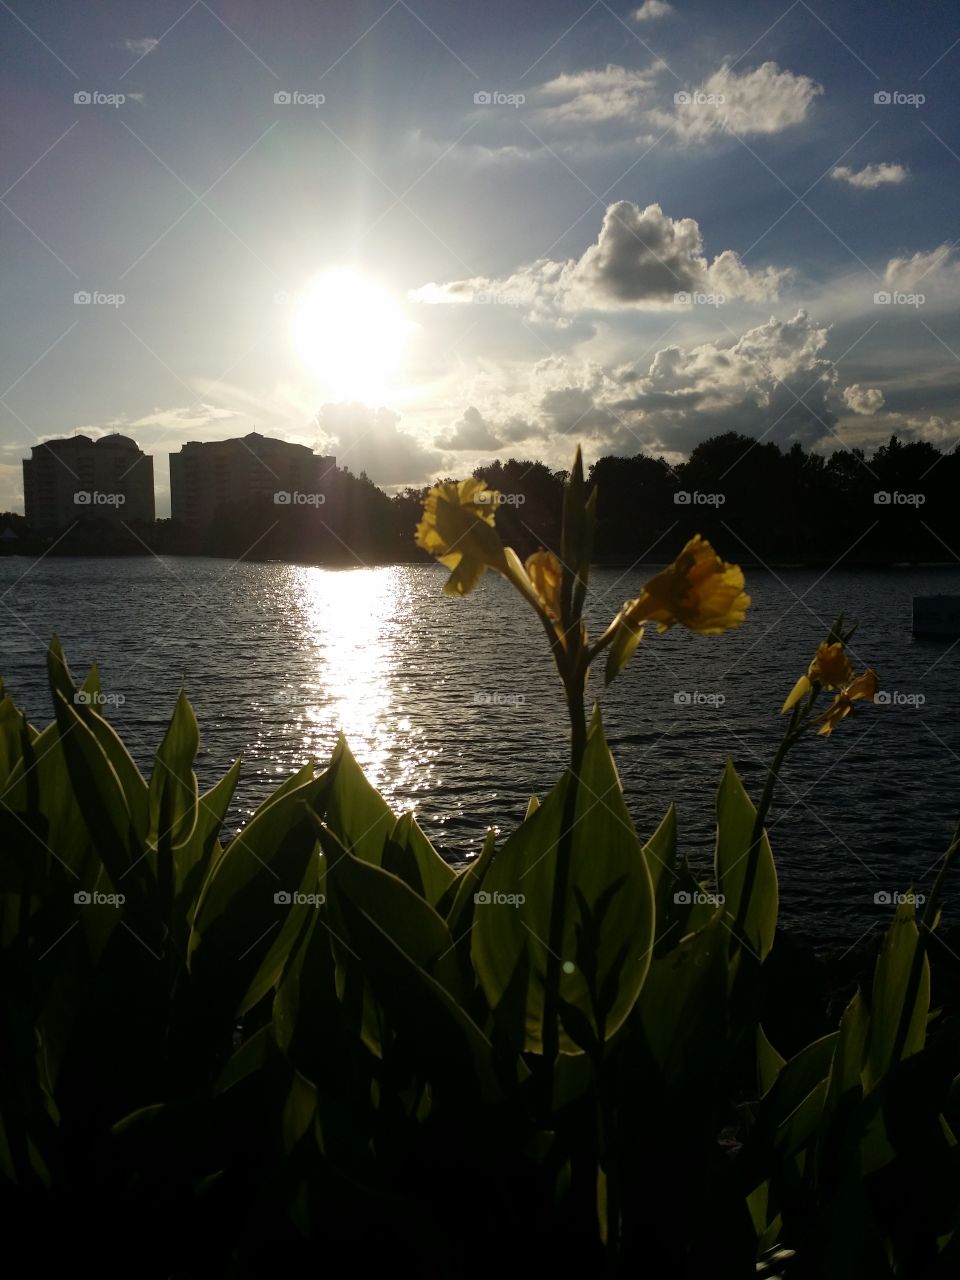 Flower In The Sunset. Took this at Cranes Roost in Altamonte Springs Florida